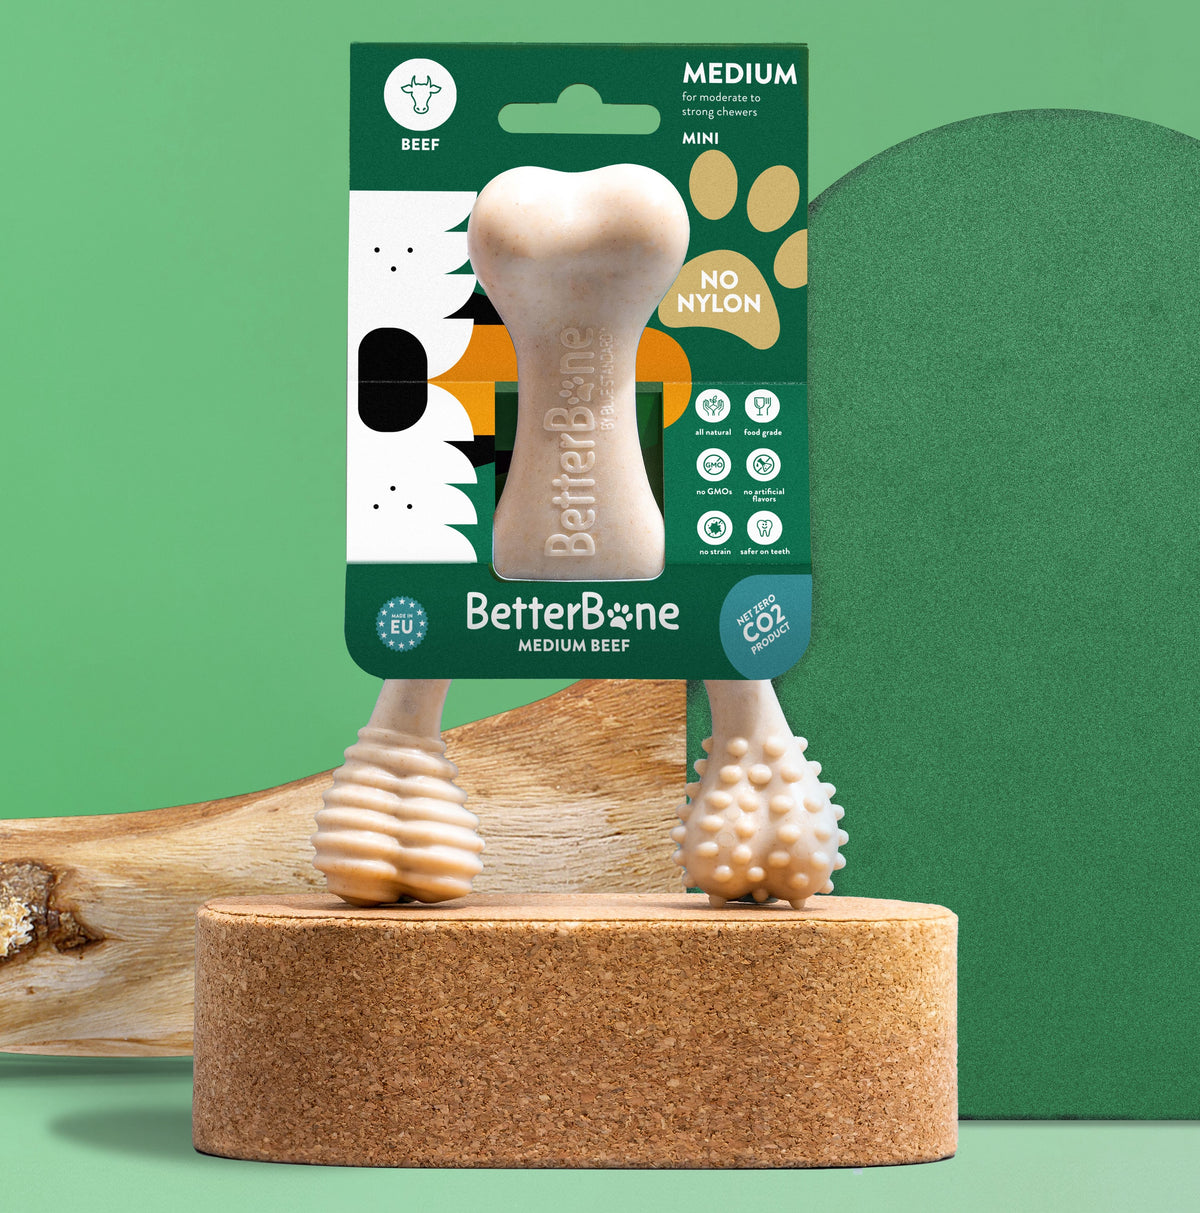 BetterBone Medium Density- Perfect for medium to strong chewers! All natural, healthier, safer.